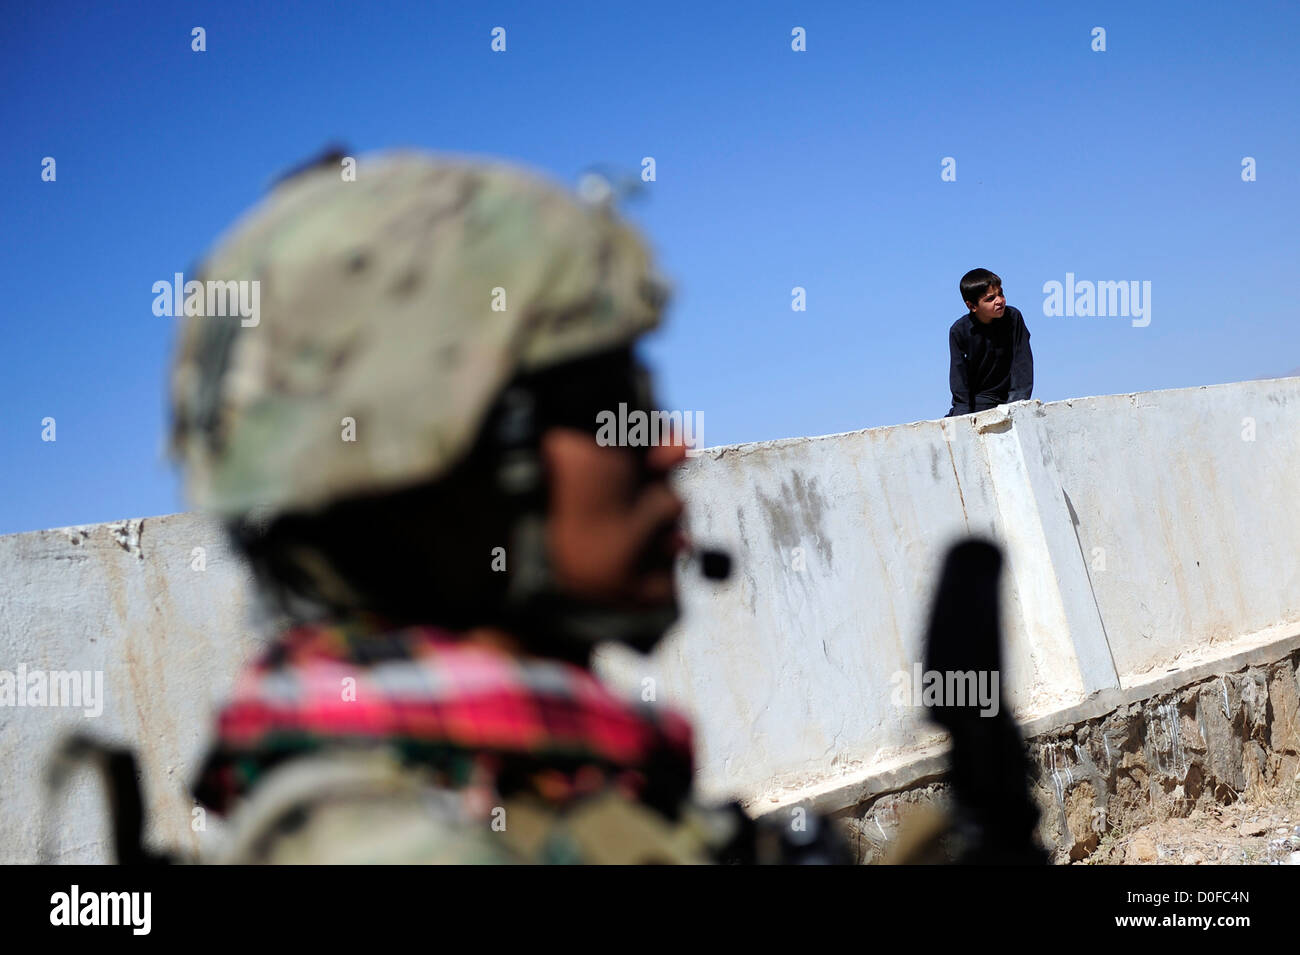 A local Afghan boy watches US soldiers guard a compound September 26, 2012 during a mission to Pur Chaman district, Farah province, Afghanistan, Sept. 26. The mission marks the first time coalition forces have been to the Pur Chaman district in over a year. Stock Photo